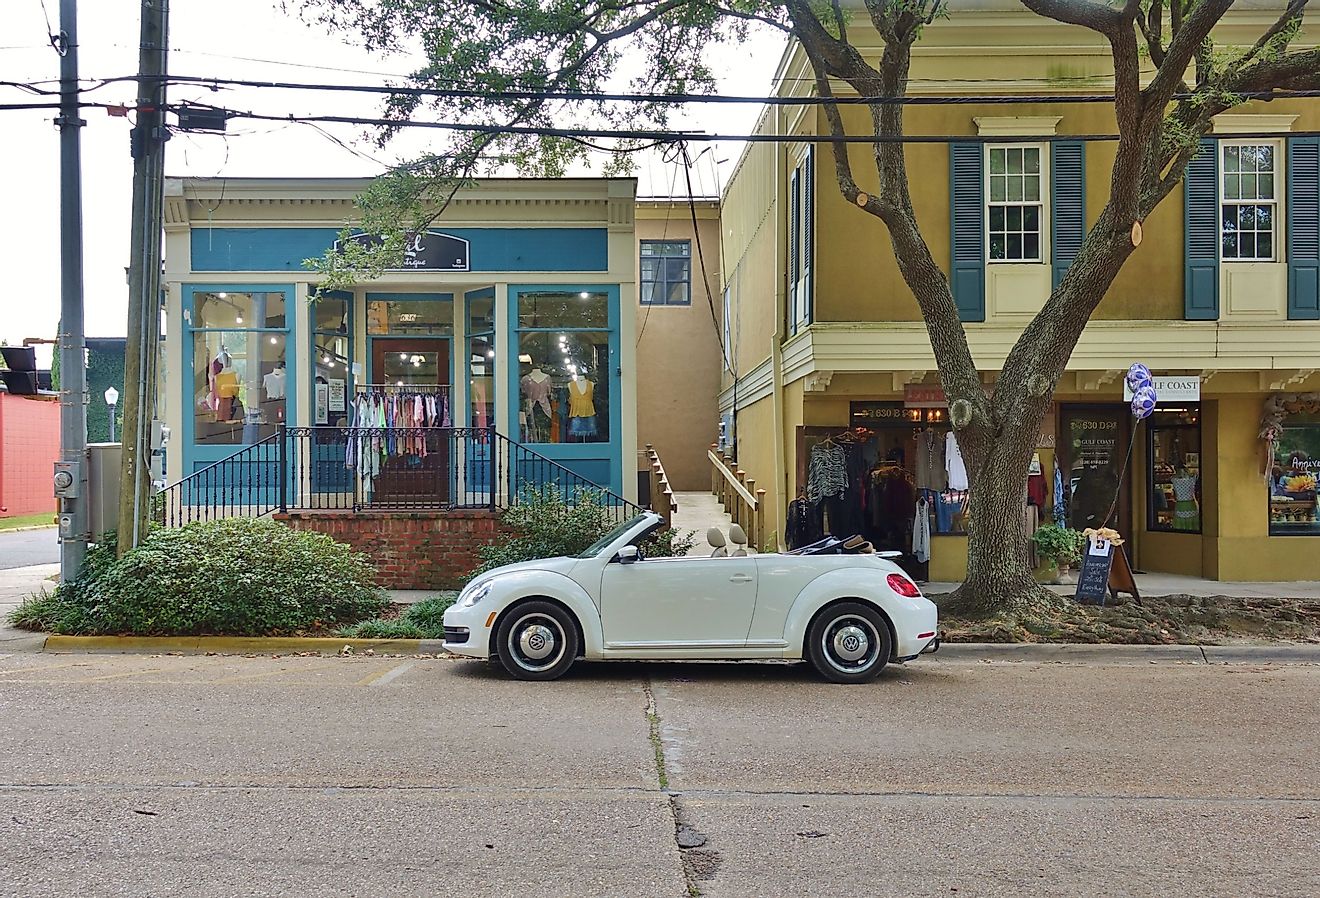 Downtown Ocean Springs, Mississippi. Image credit EQRoy via Shutterstock